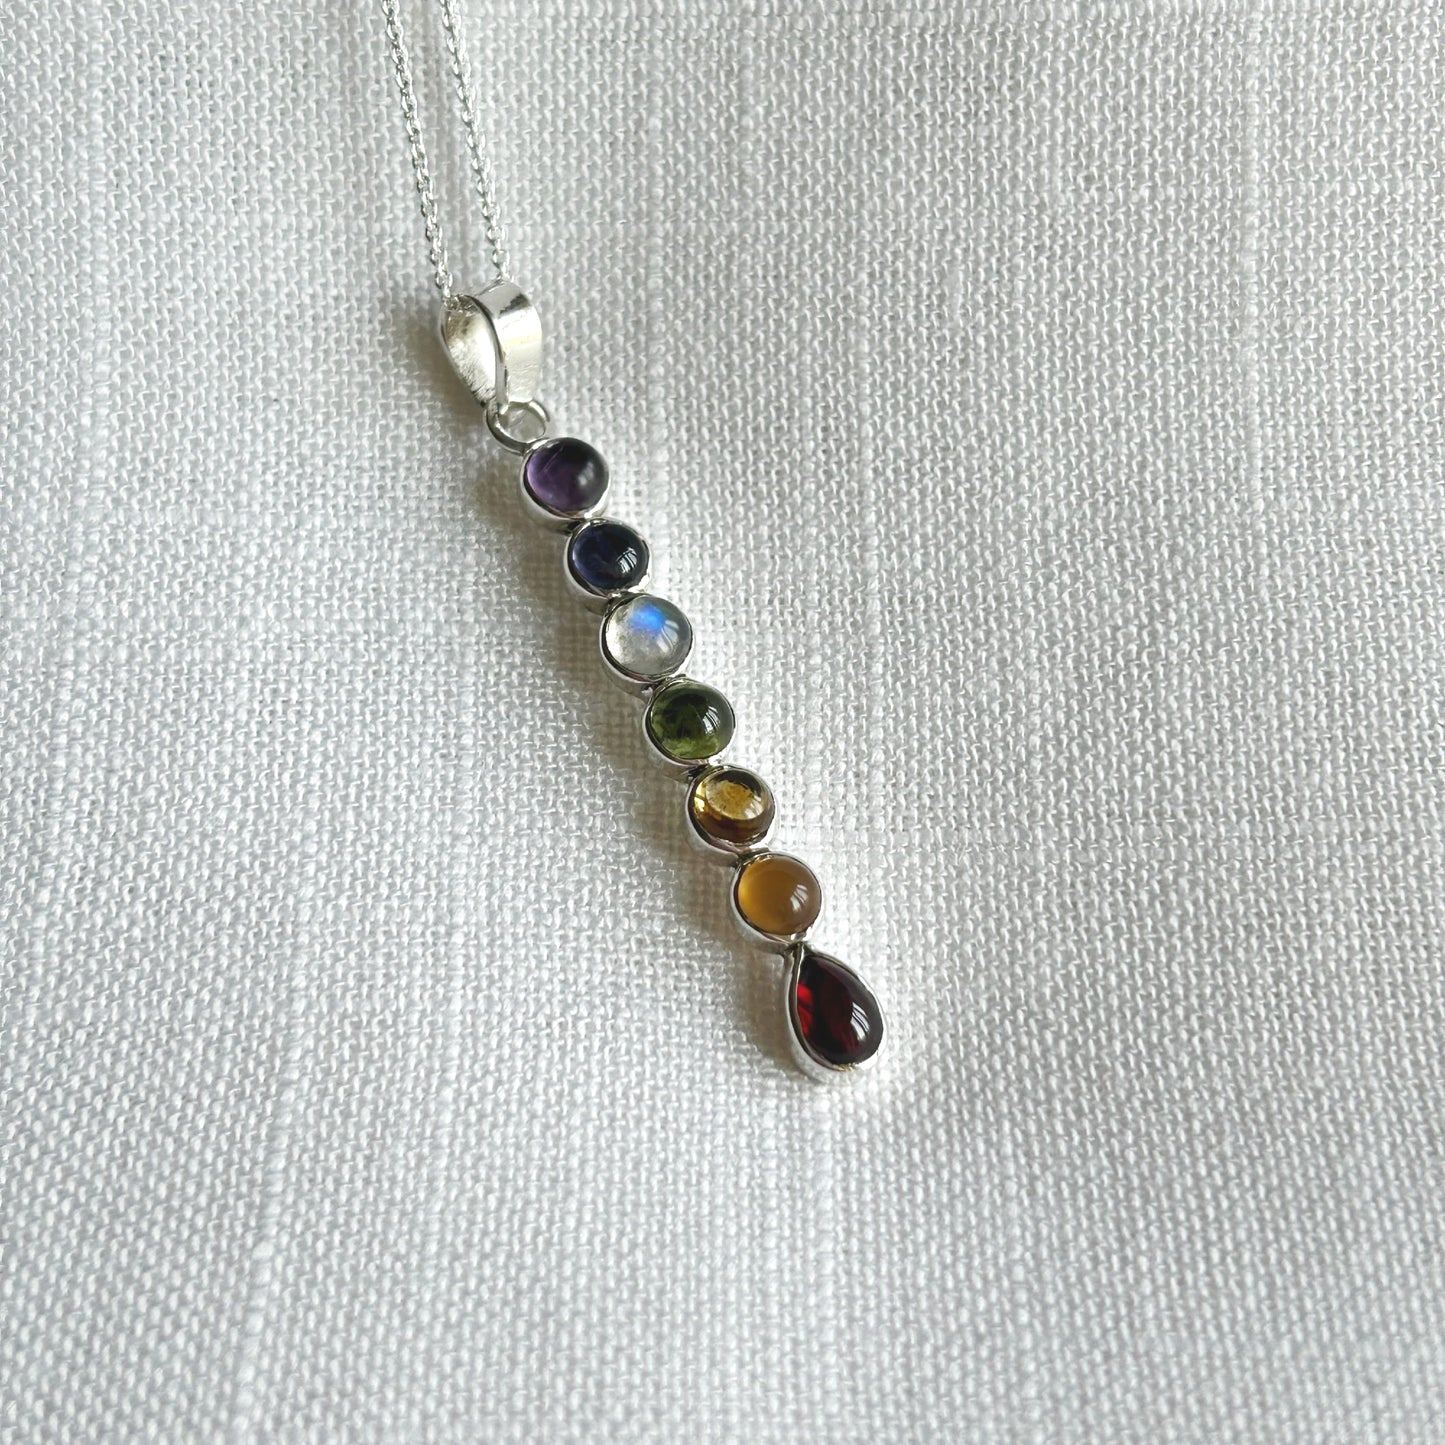 This smaller genuine gemstone pendant necklace includes all the essentials of the seven Chakras.   These multi coloured gemstones represent the colours of the energy centres within the body know as Chakra points.  Amethyst crown, Iolite third eye, Topaz throat, Peridot heart, Citrine solar plexus, Carnelian sacral and Garnet.  Size: 5.5cm Long including the bale x 0.5cm Wide. Pendant Weight is 3.8g  All pendants come supplied on a 20 inch sterling silver chain